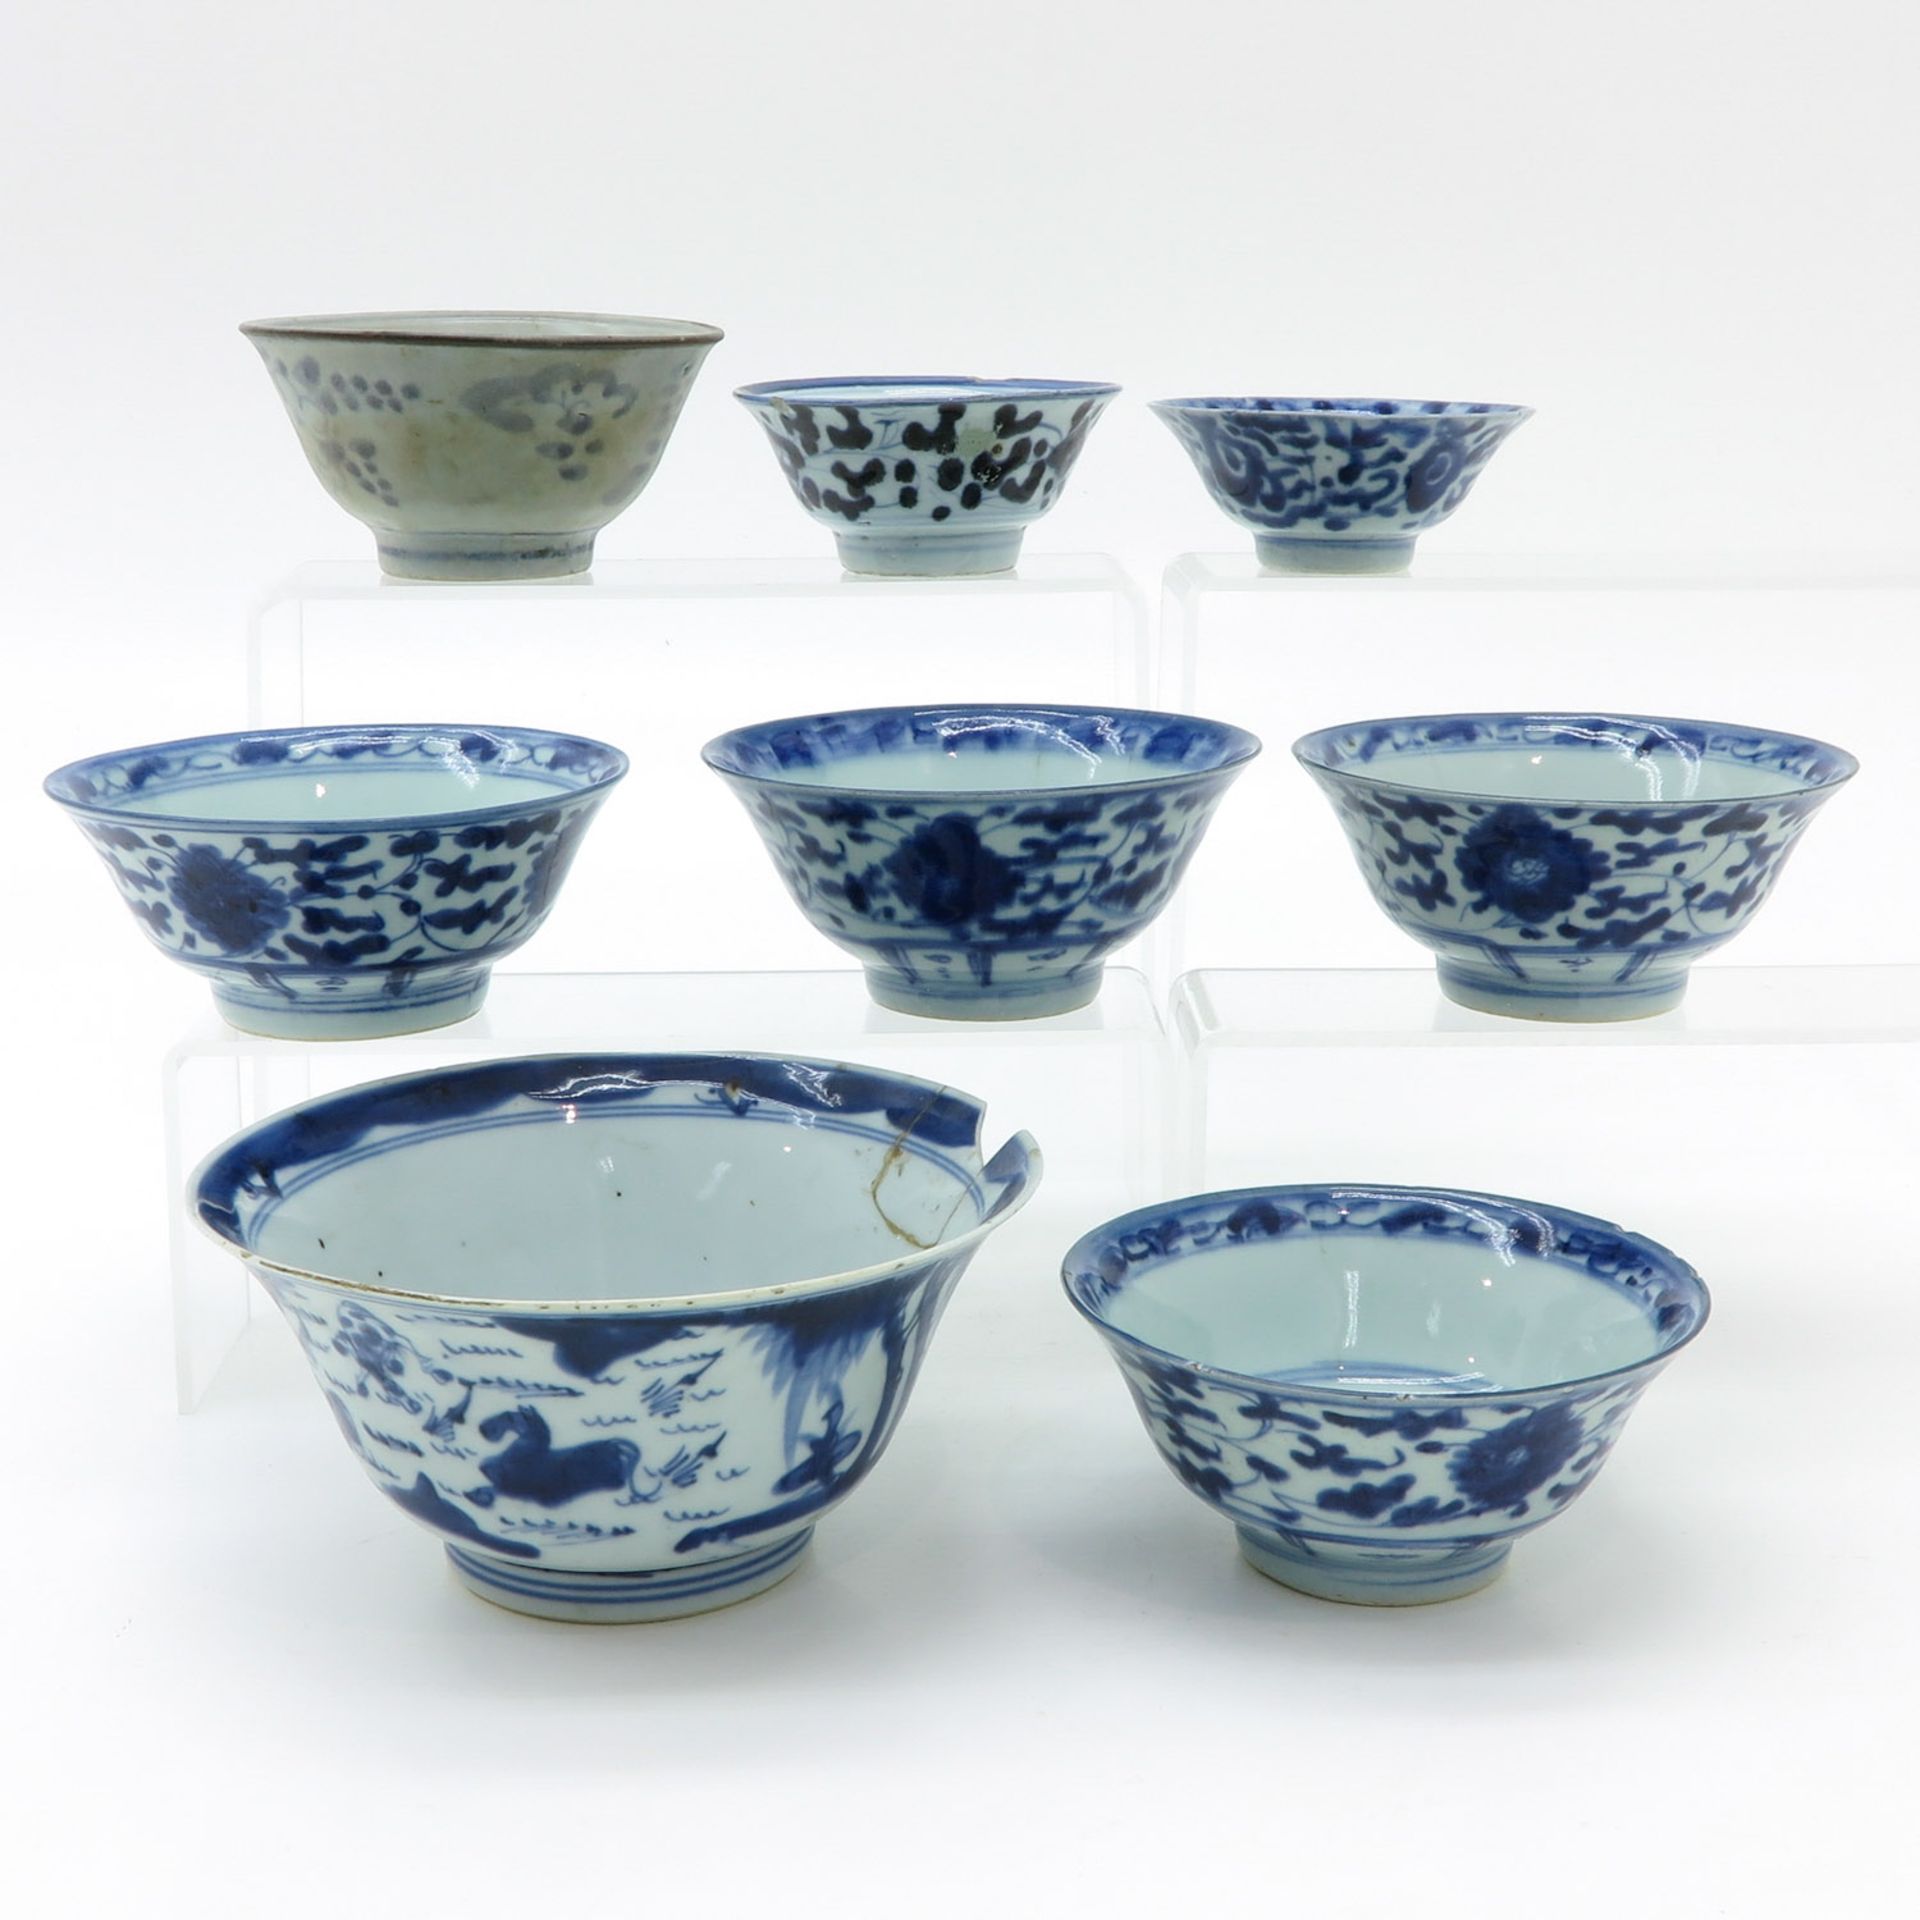 Diverse Lot of Blue and White Decor Bowls